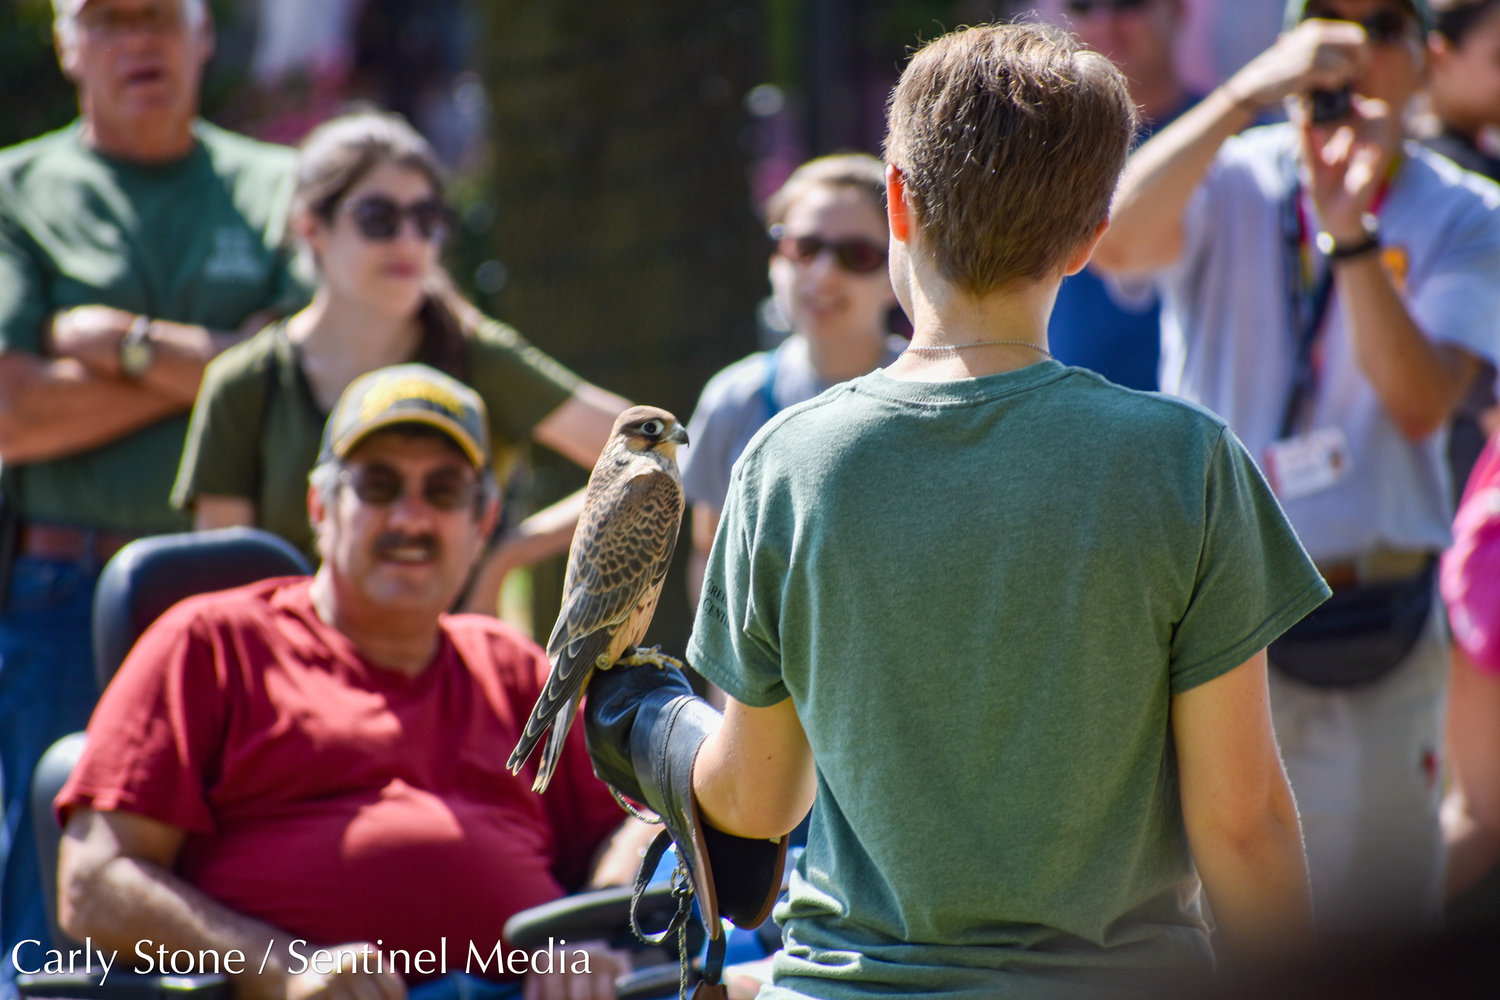 Fairgoers take a look at this peregrine falcon as part of the daily Birds of Prey show at the New York State Fair.